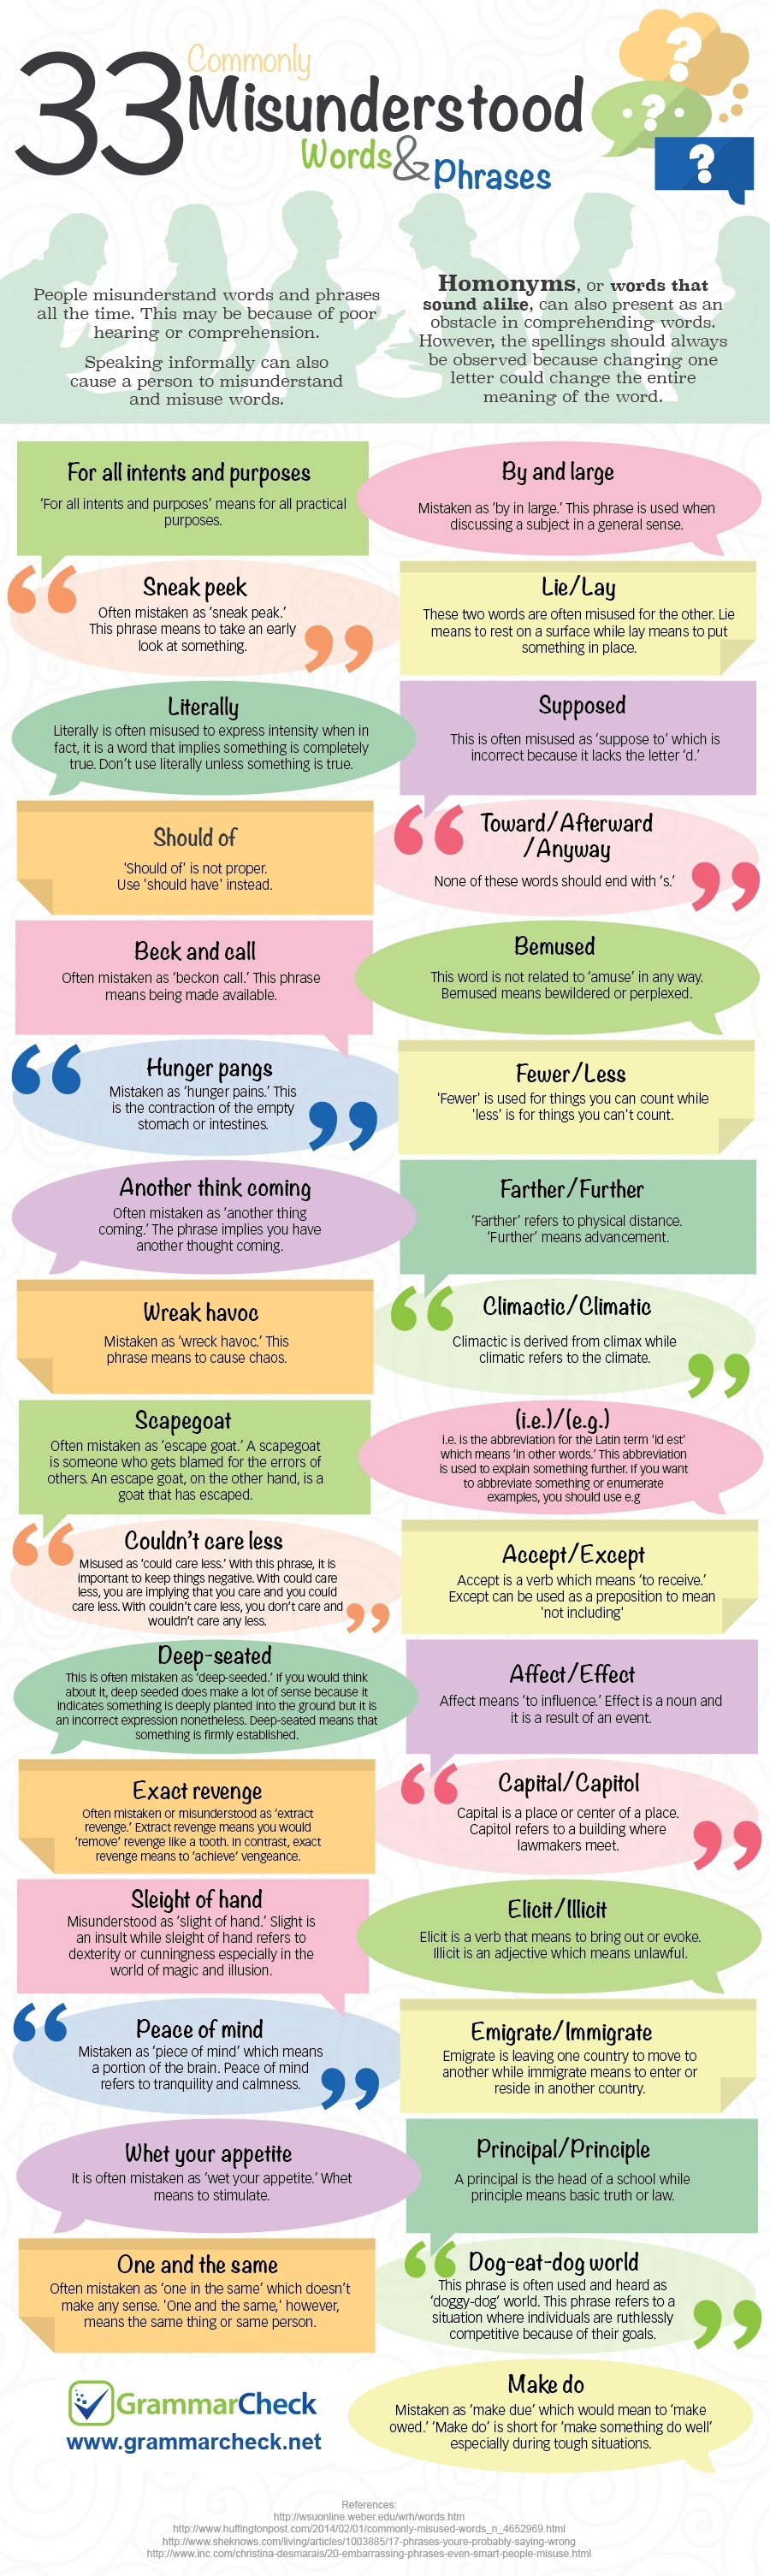 33 Commonly Misunderstood Words & Phrases (Infographic)